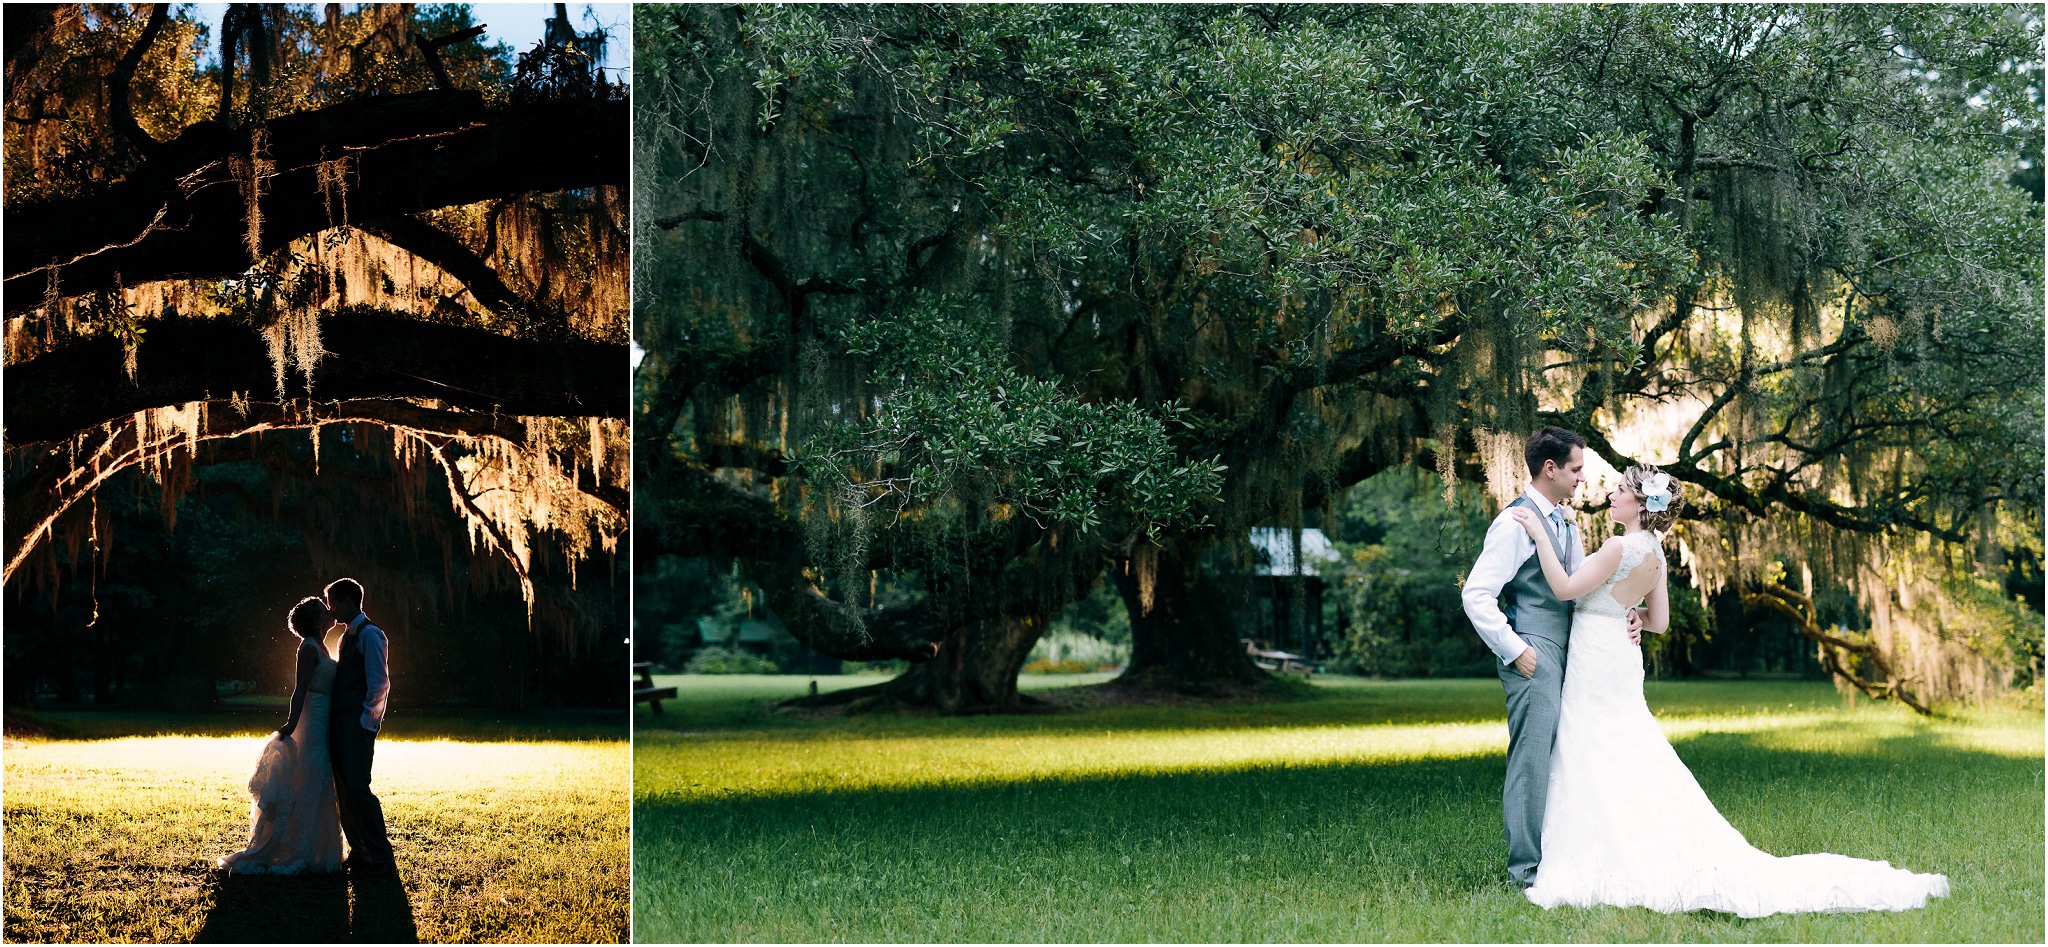 More shots of the couple under the oak with varied lighting